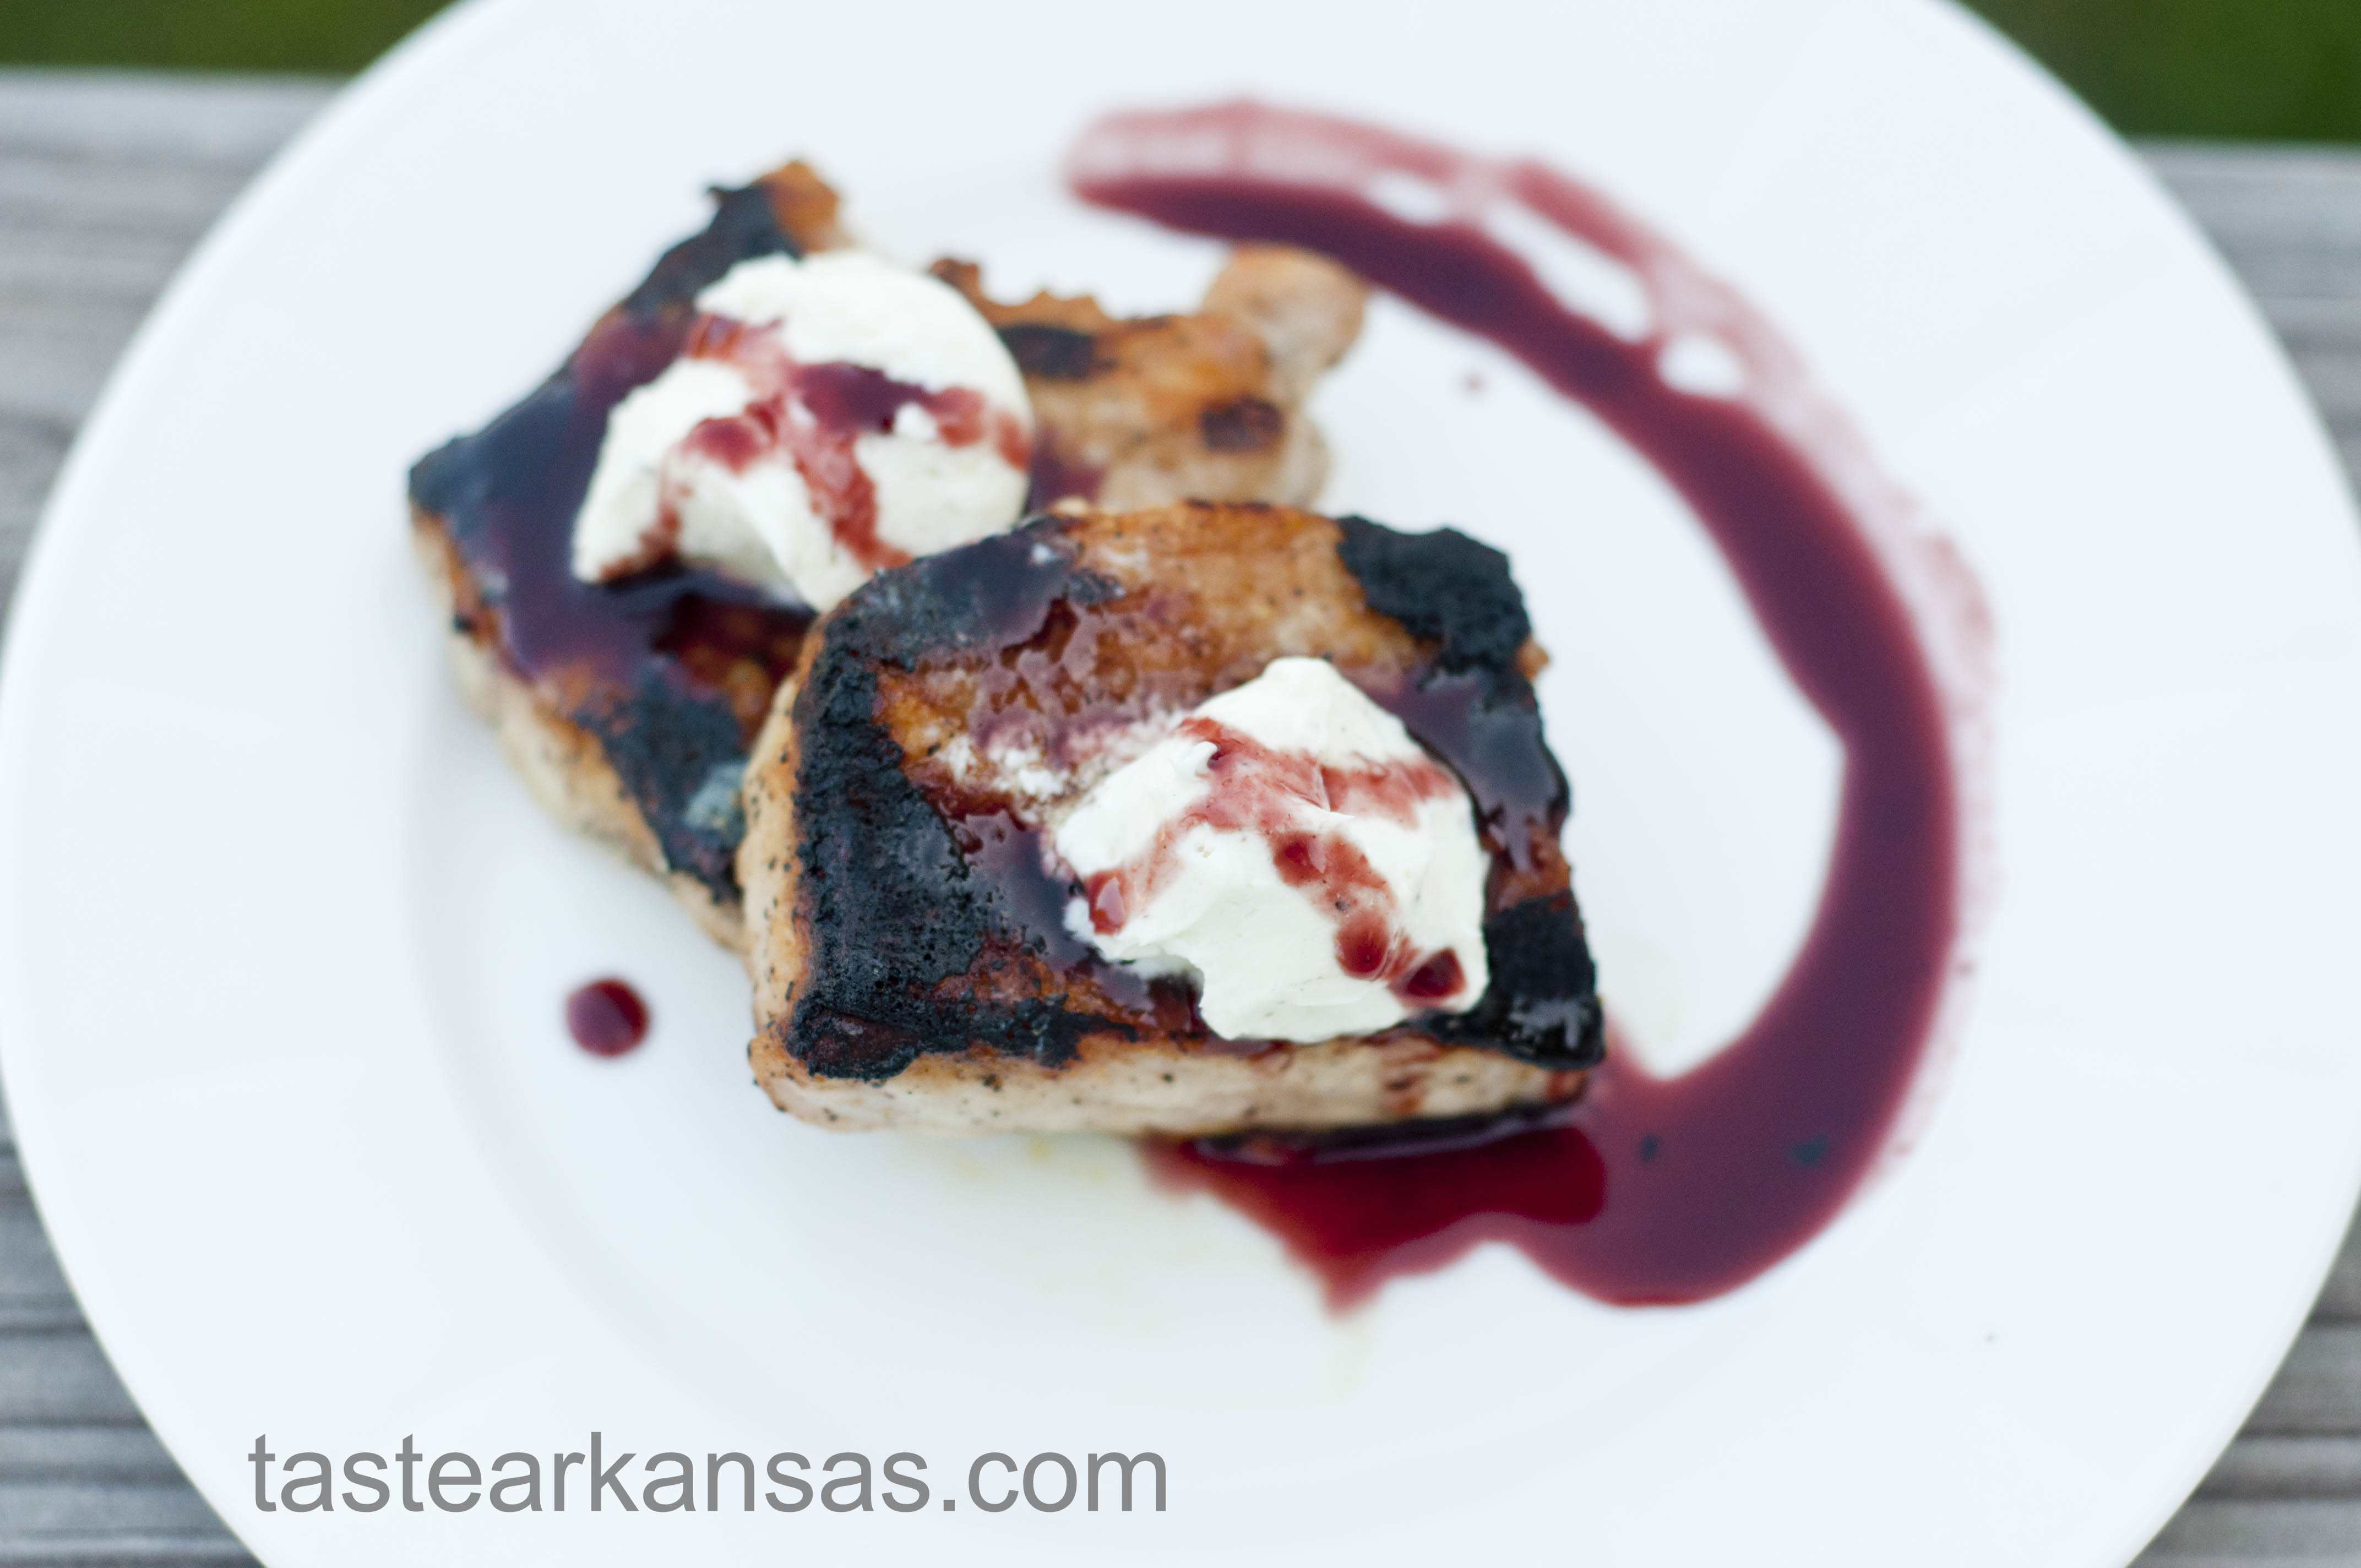 Pork Loin Medallions with Goat Cheese Butter and a Blackberry Balsamic Reduction